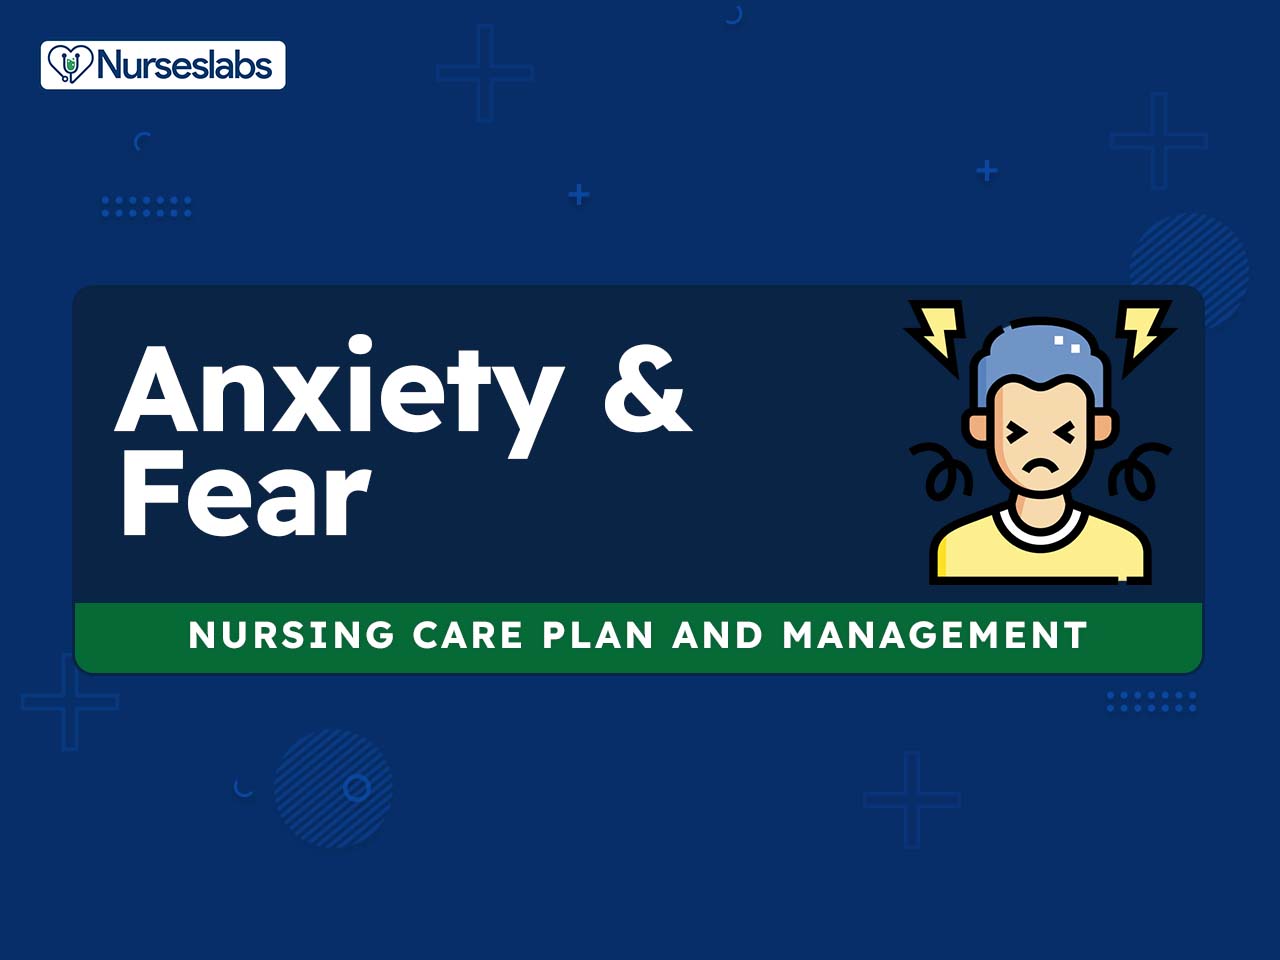 Medicine for Anxiety and Other Coping Strategies